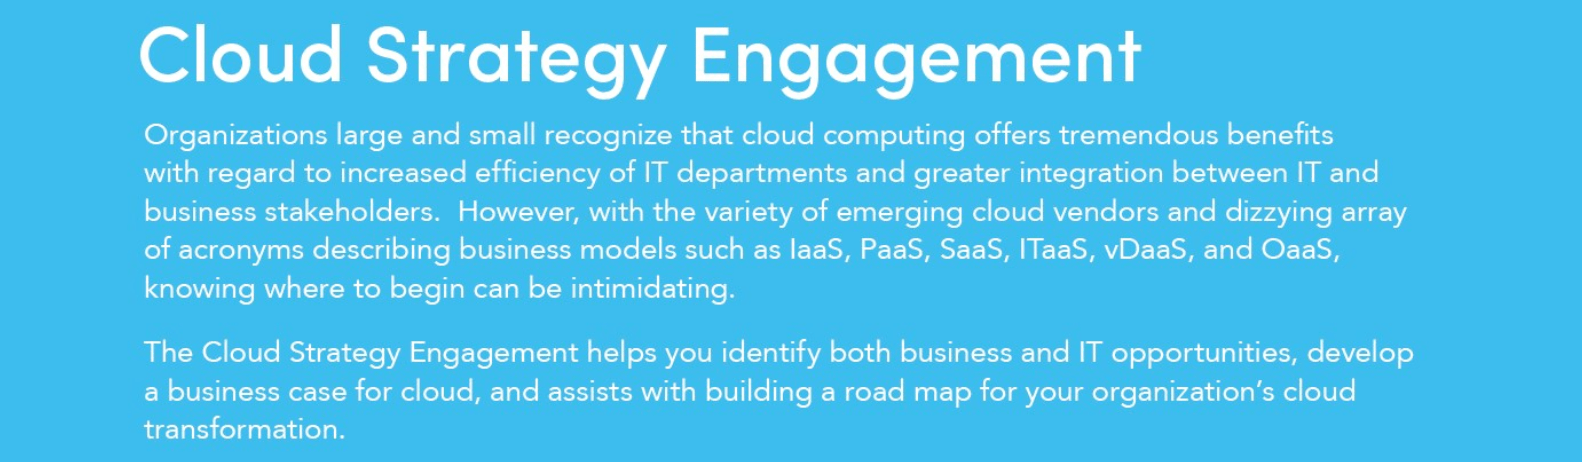 Cloud_Strategy_Engagement.png